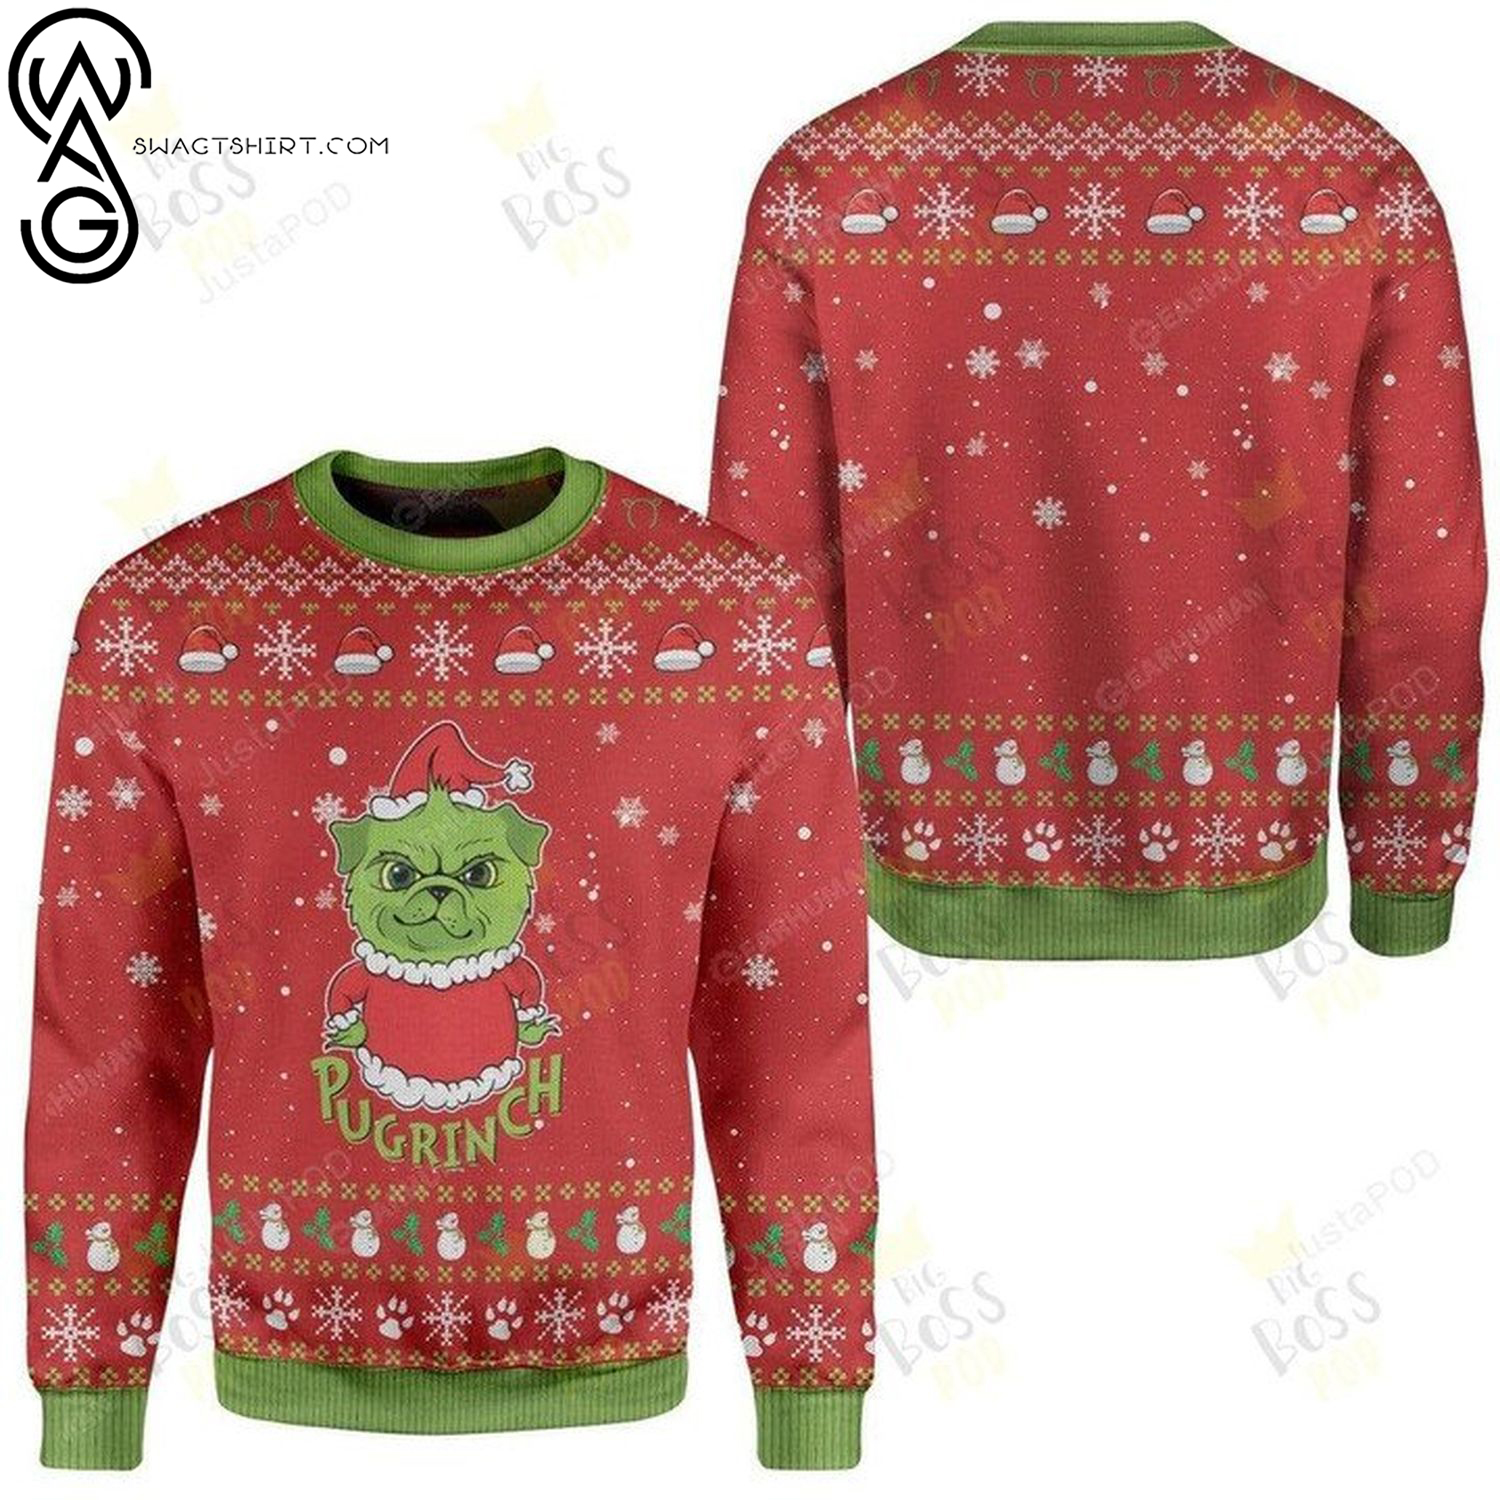 The grinch and pug dog pugrinch ugly christmas sweater